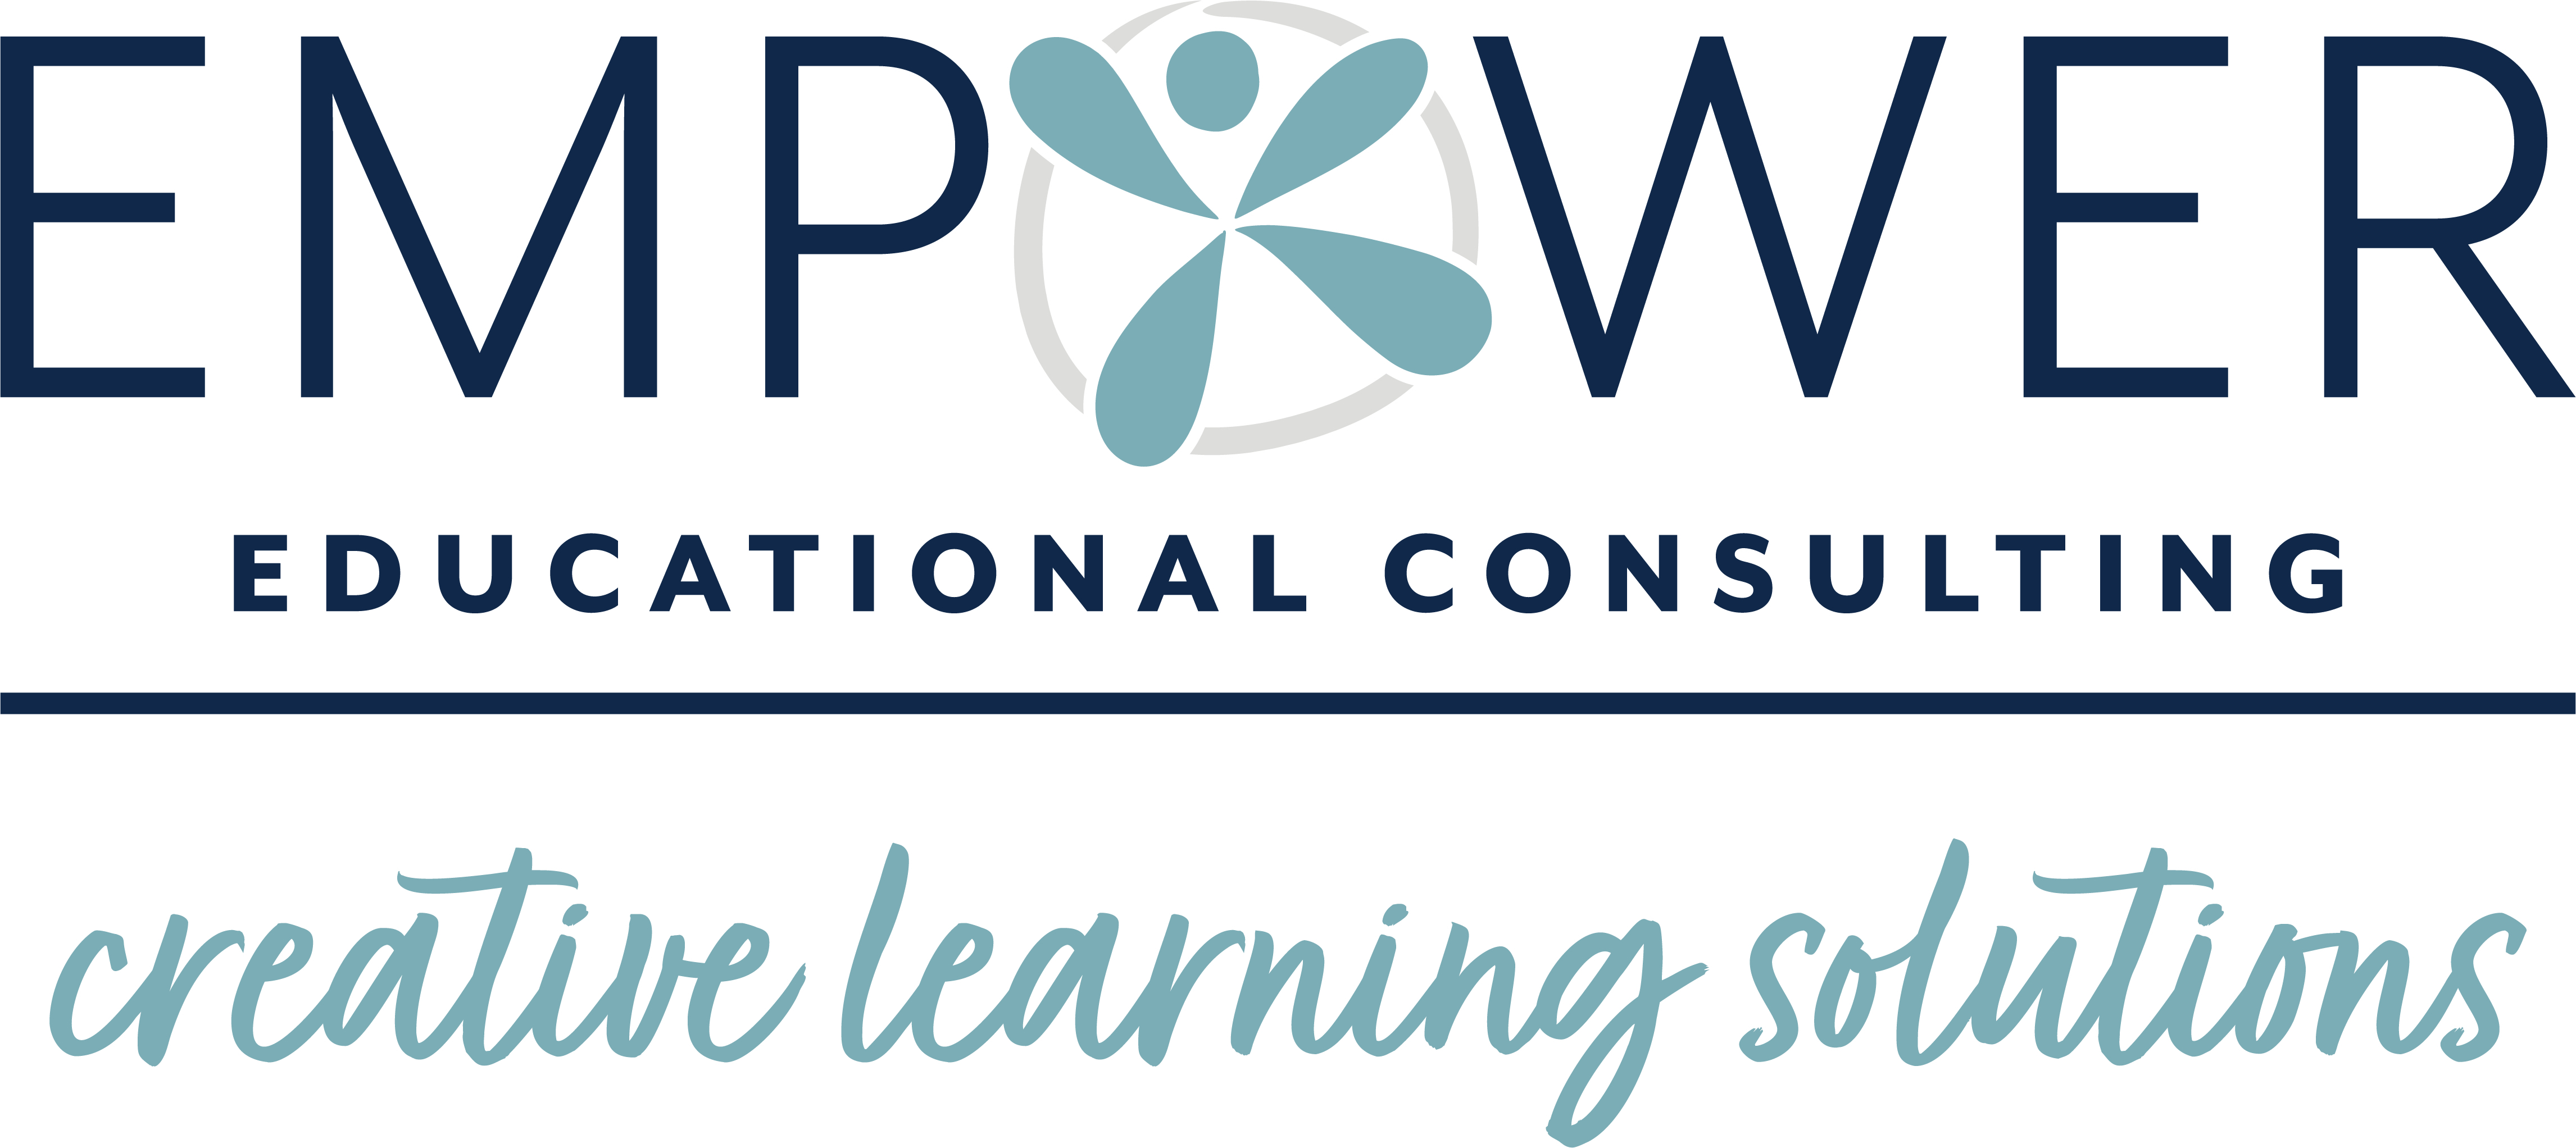 Empower Education Consulting_Primary Logo and Tagline_color